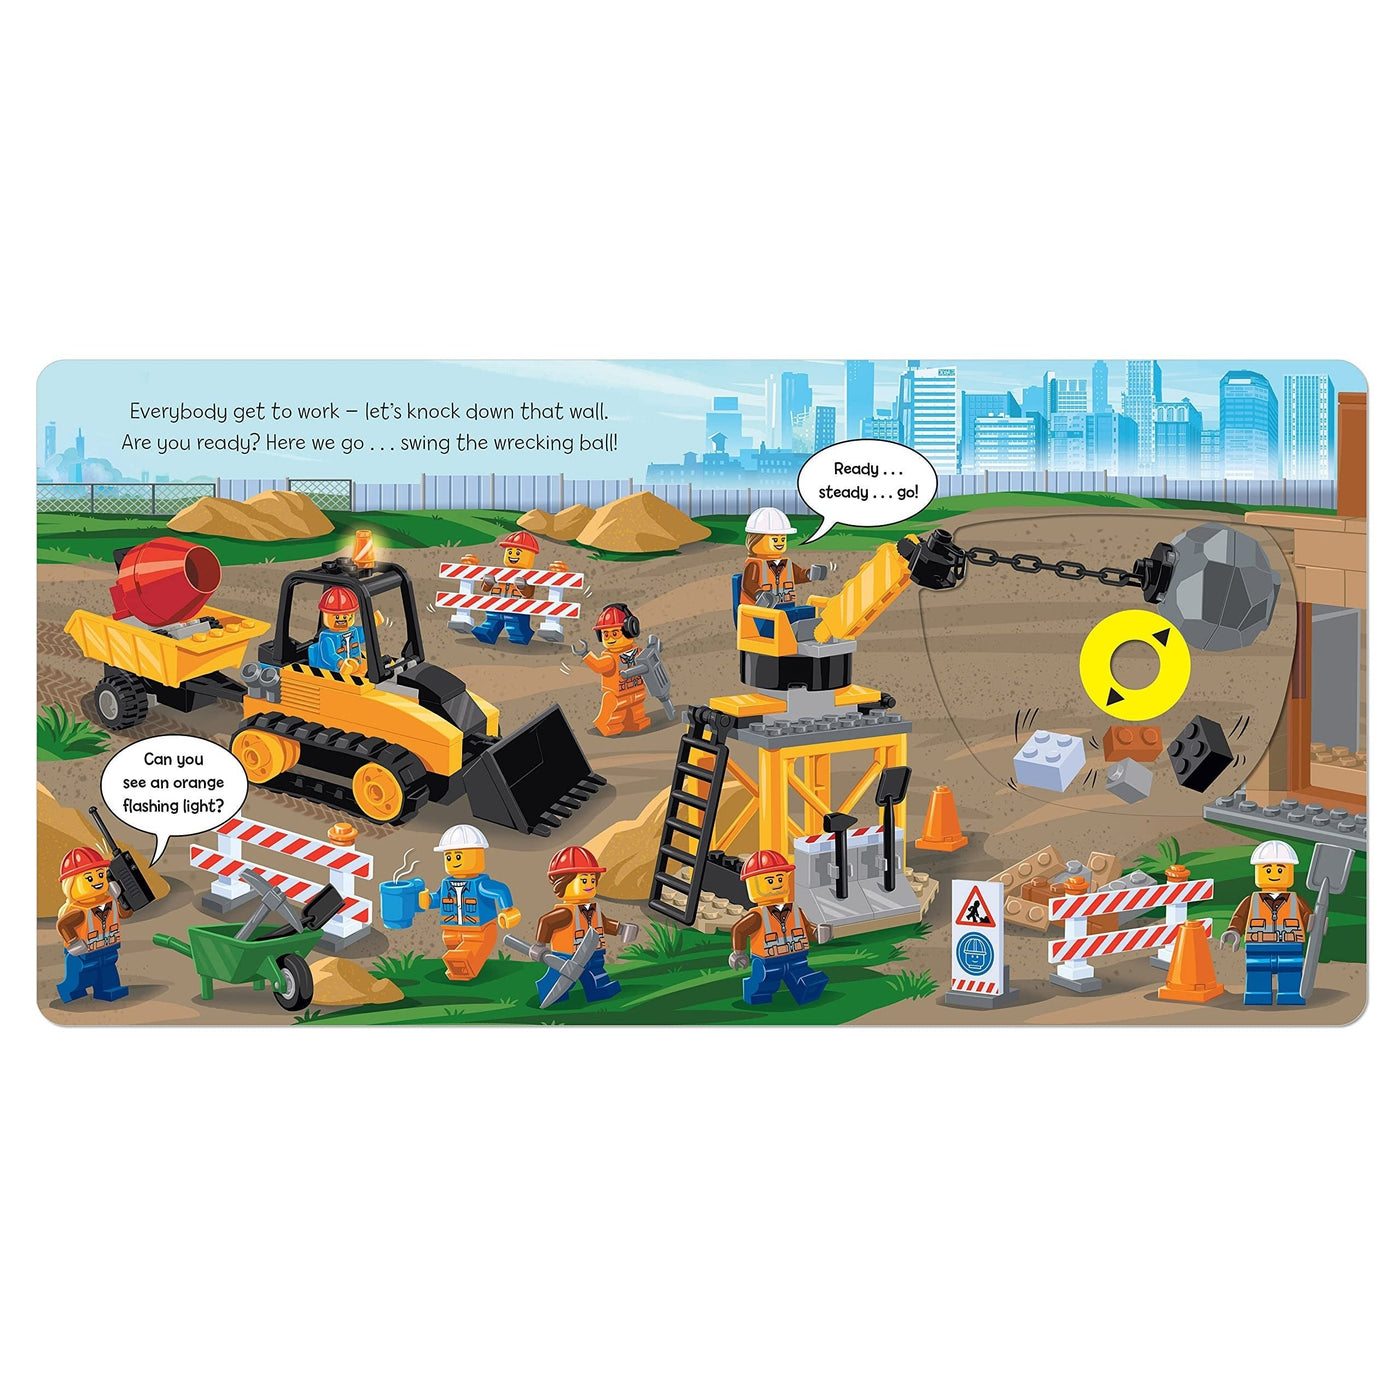 Lego® City Building Site: A Push Pull And Slide Book